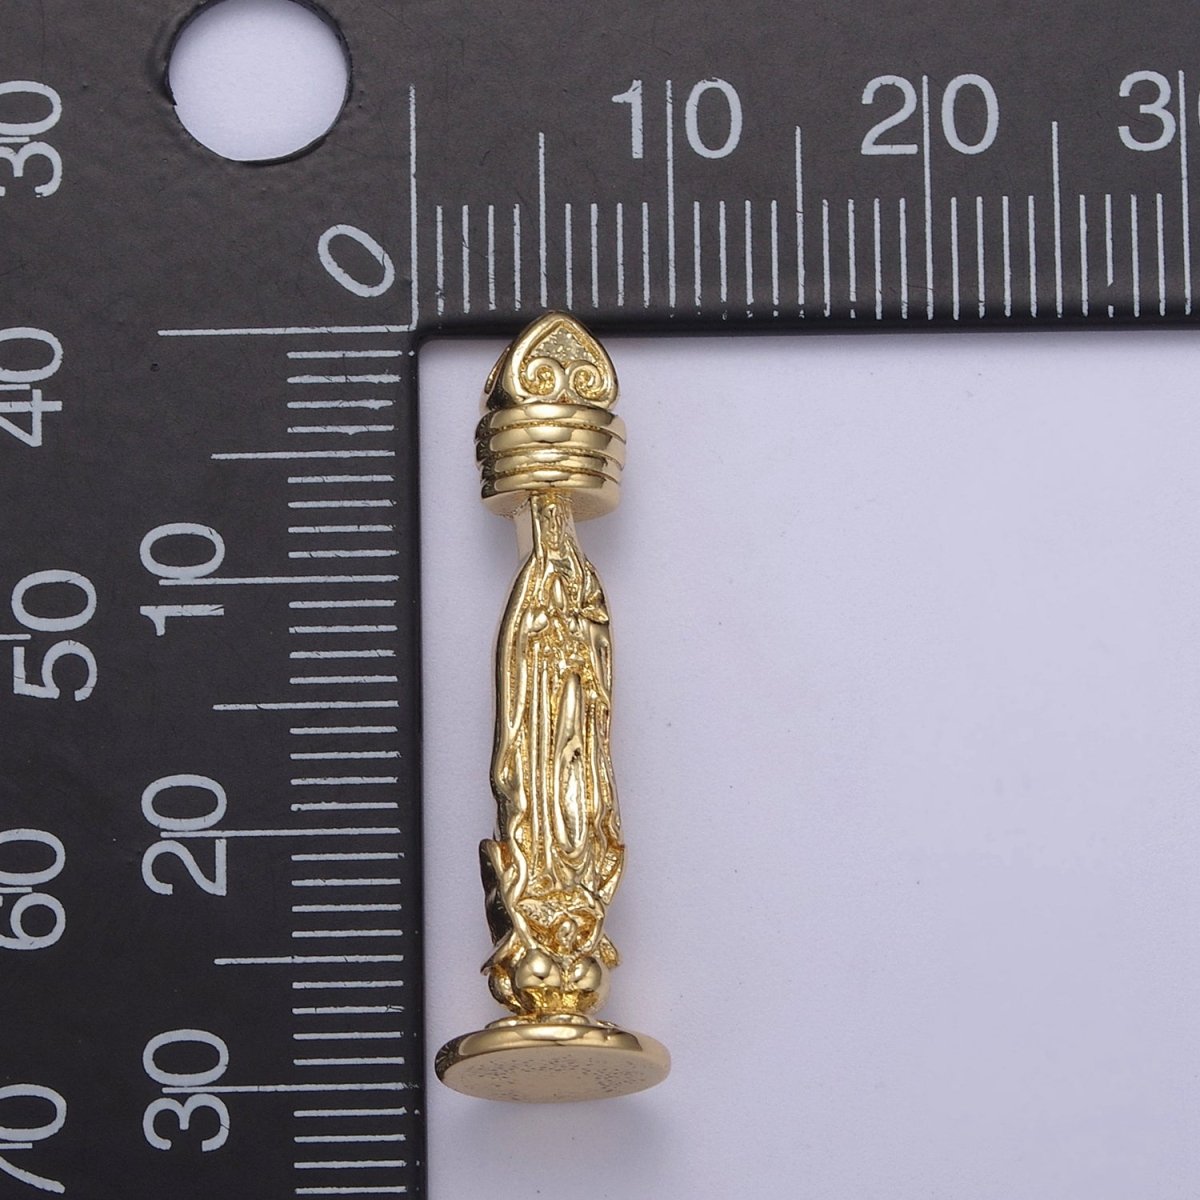 Gold Virgin Mary statue Charm Religious praying Pendant for Necklace rosary Figurine Catholic Jewelry N-628 - DLUXCA